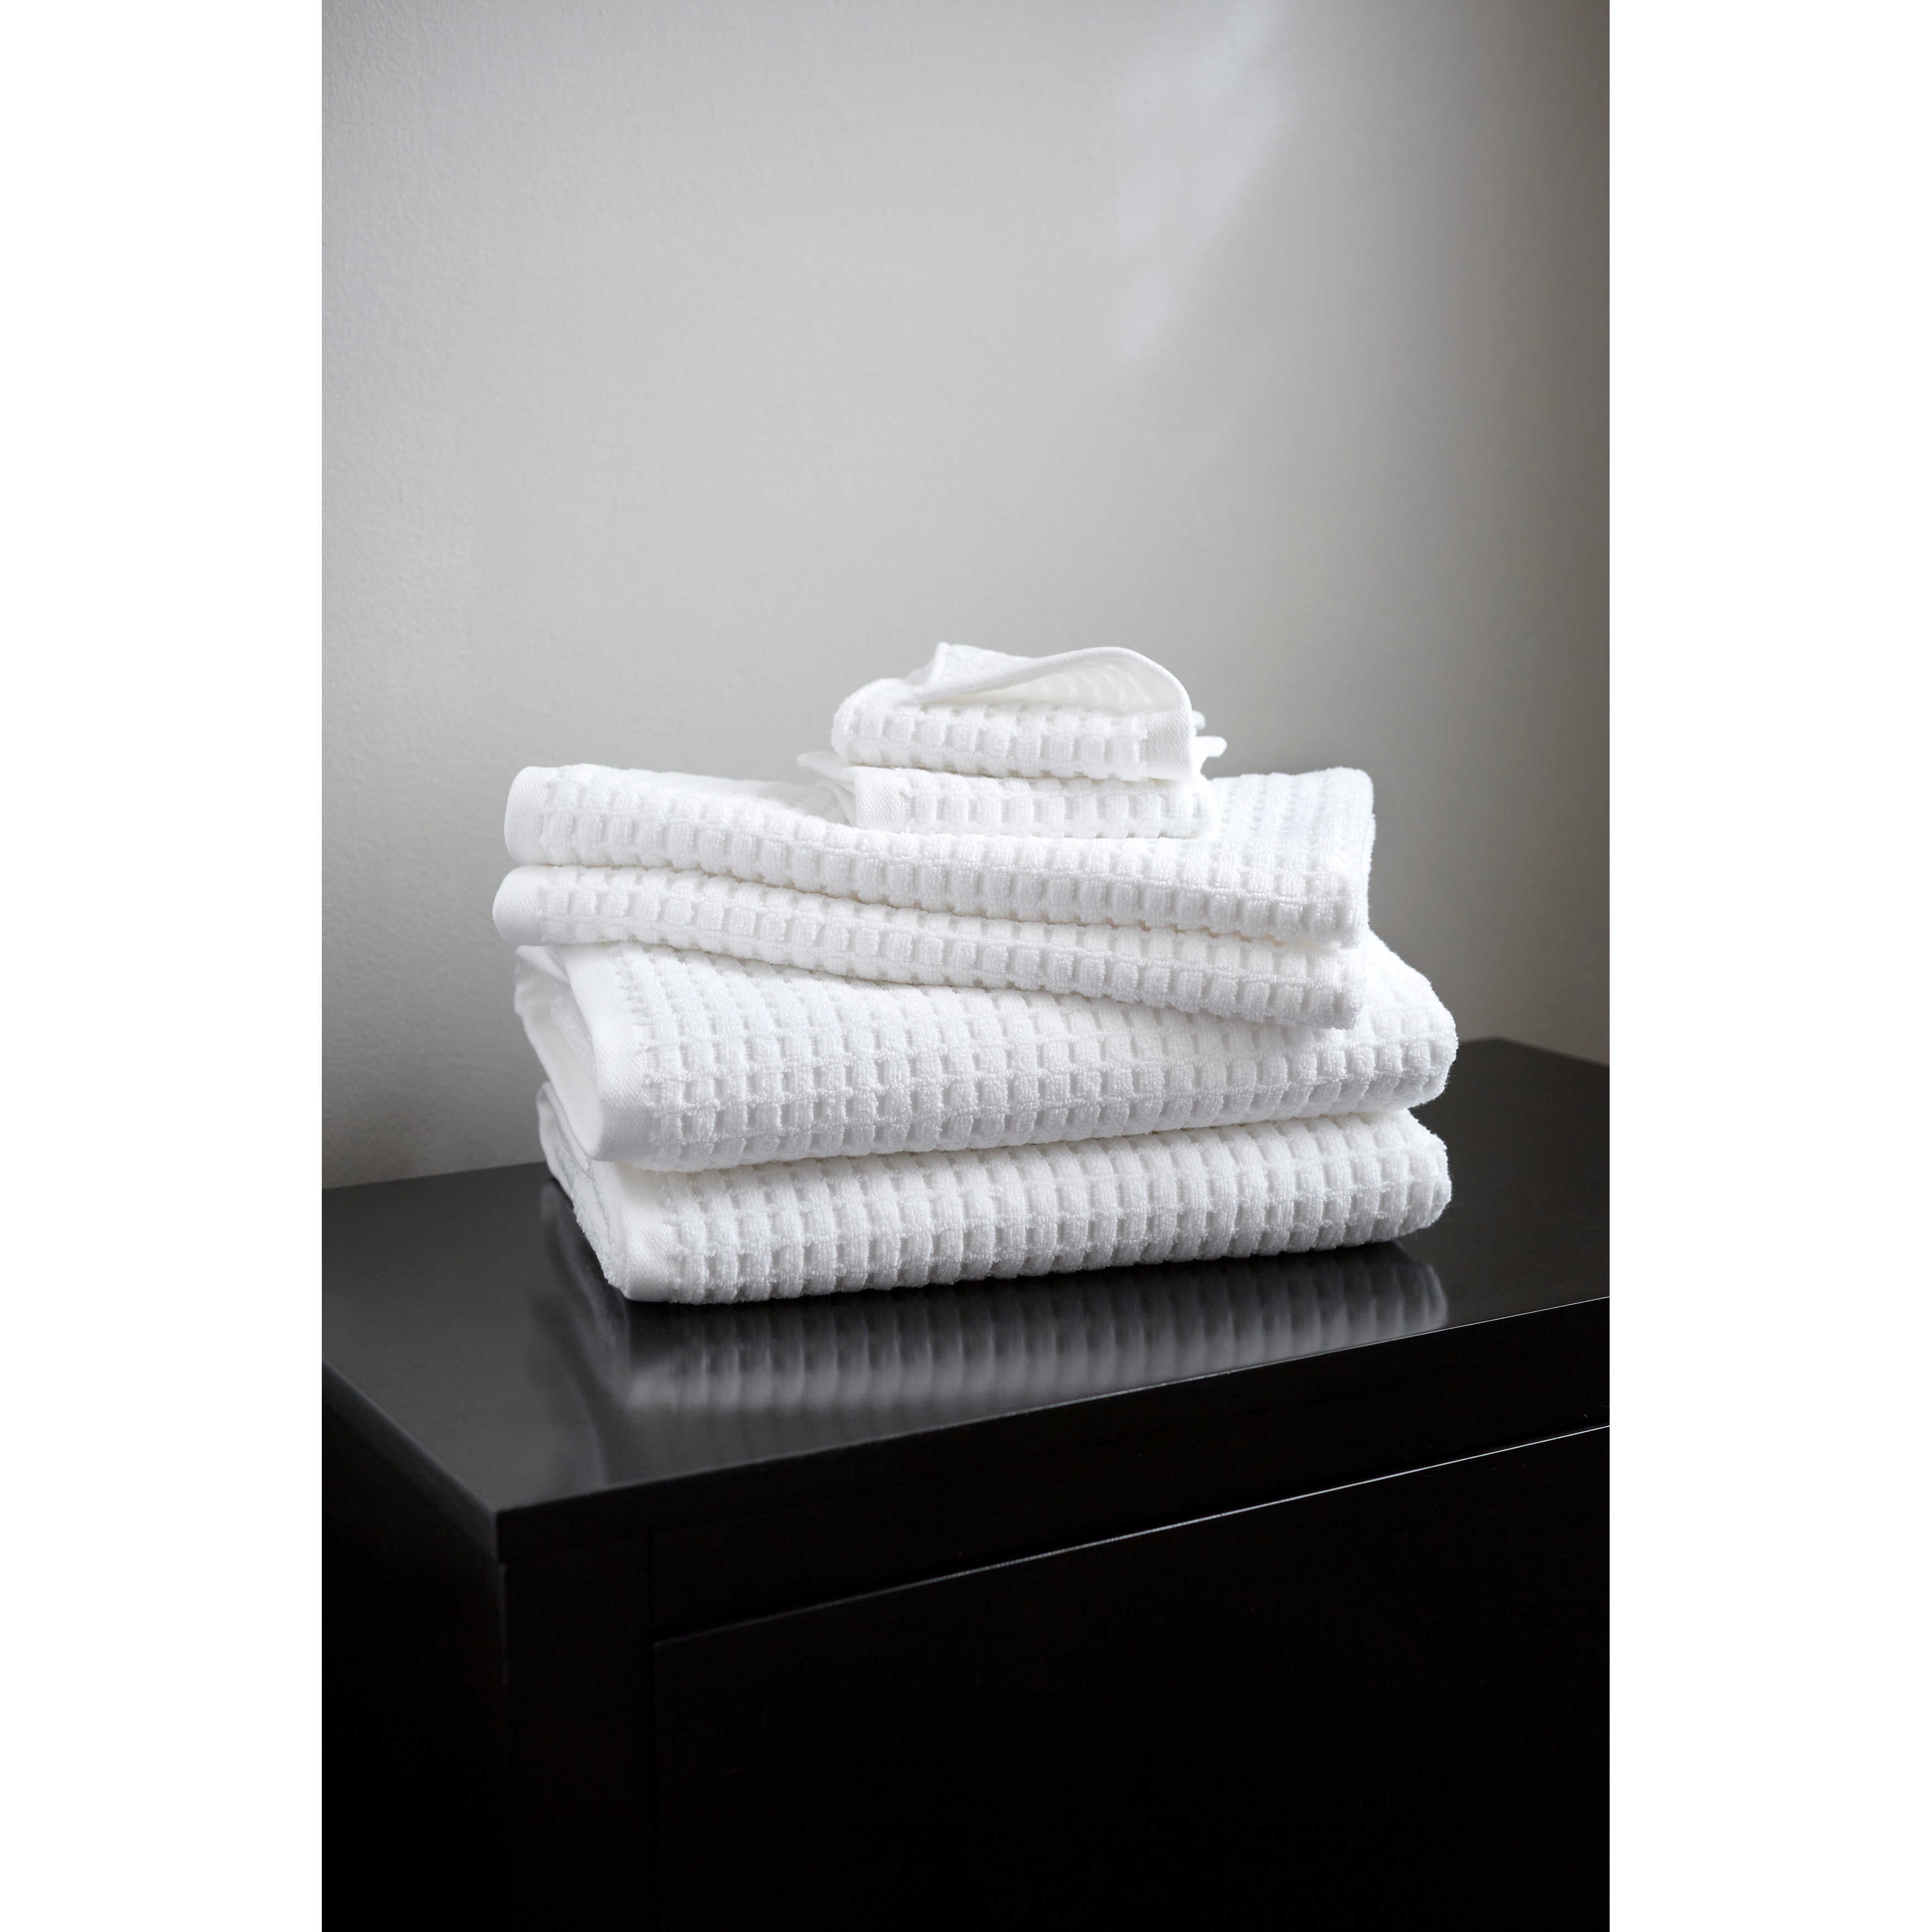 https://ak1.ostkcdn.com/images/products/is/images/direct/fd184154dc842f5dcea622dfef2b982ee16276b1/DKNY-Quick-Dry-6-pc-Towel-Set.jpg